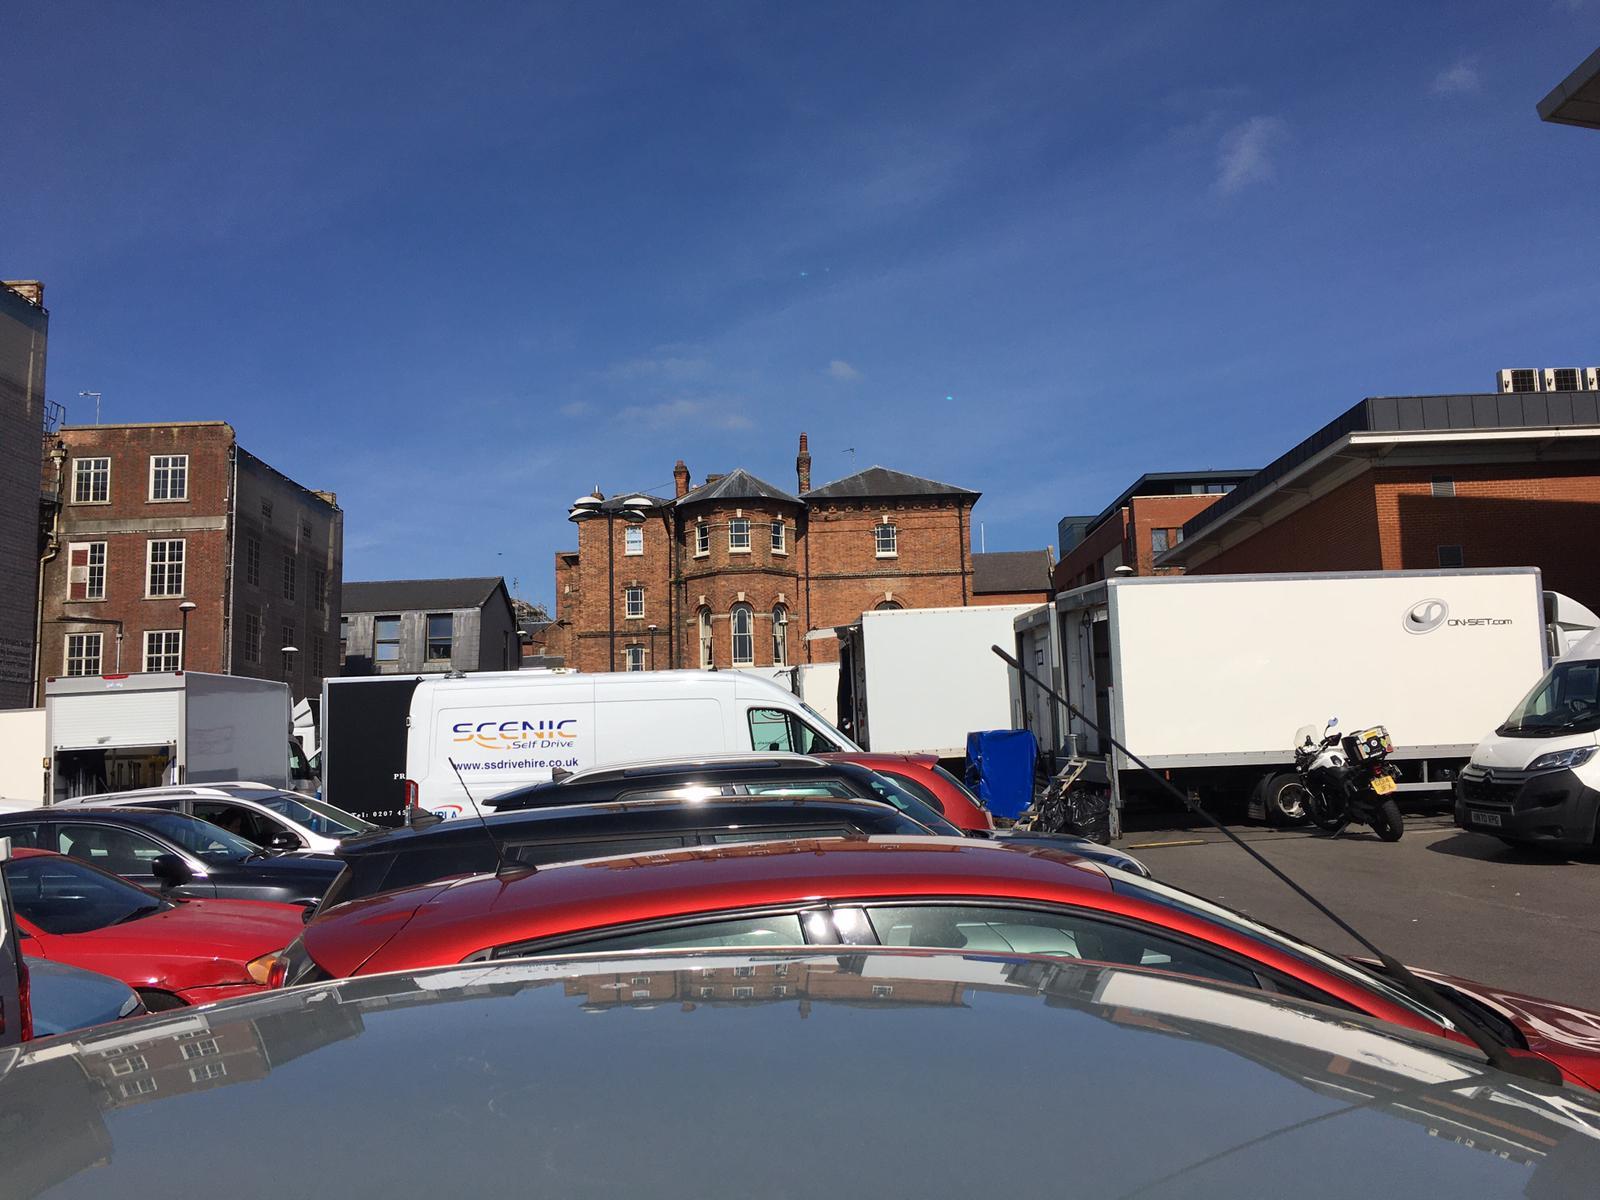 It has been reported that a film is being shot in Aylesbury